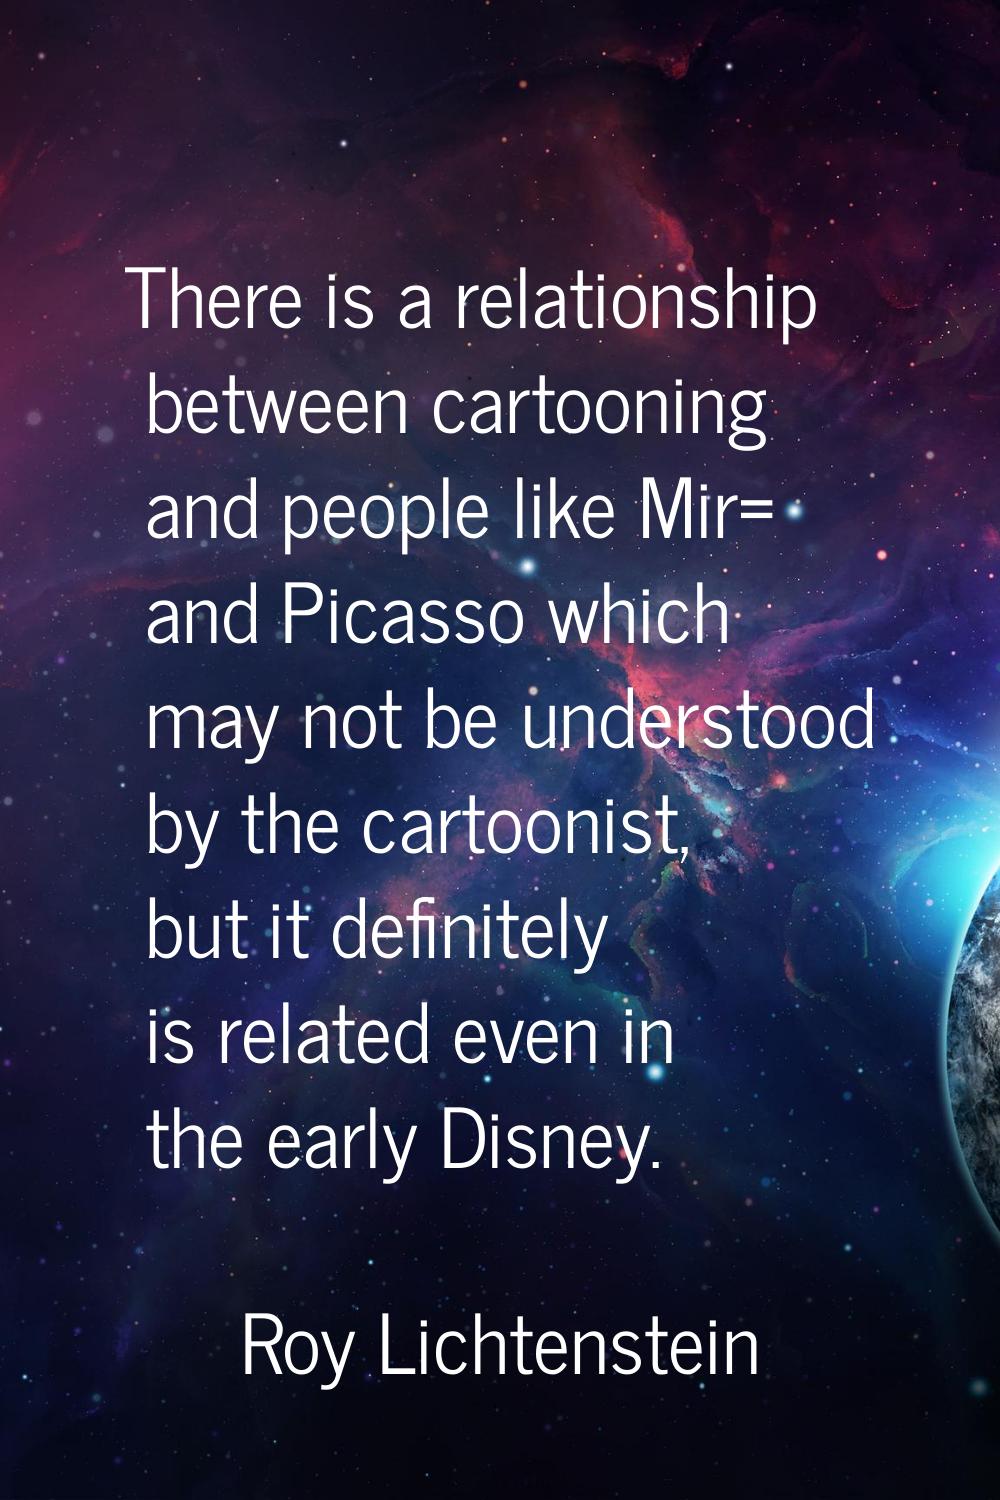 There is a relationship between cartooning and people like Mir= and Picasso which may not be unders